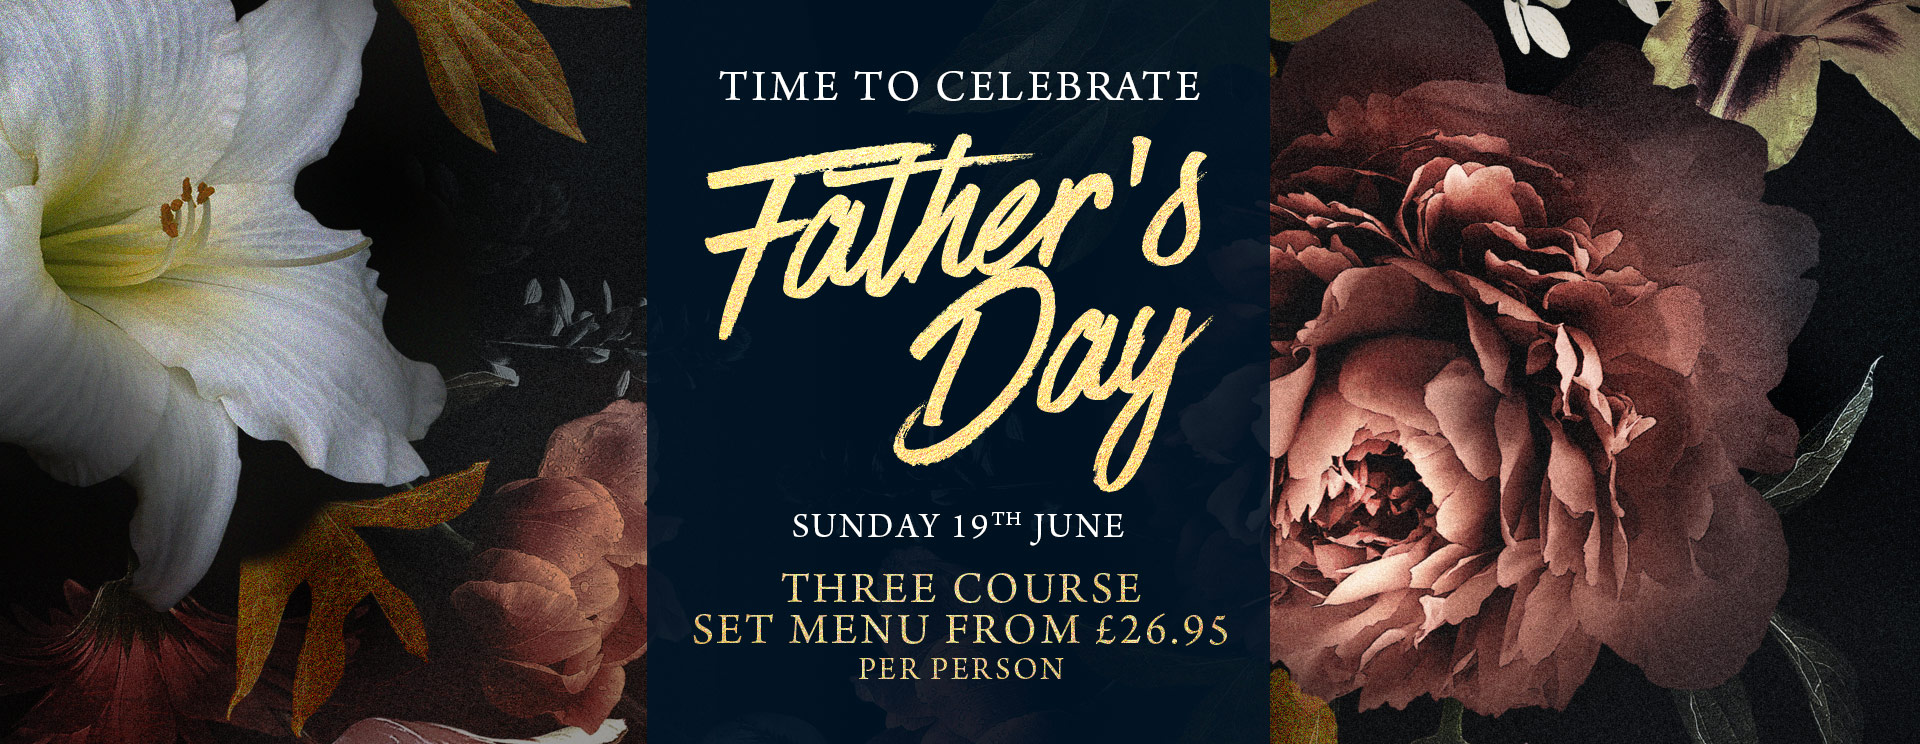 Fathers Day at The Bell